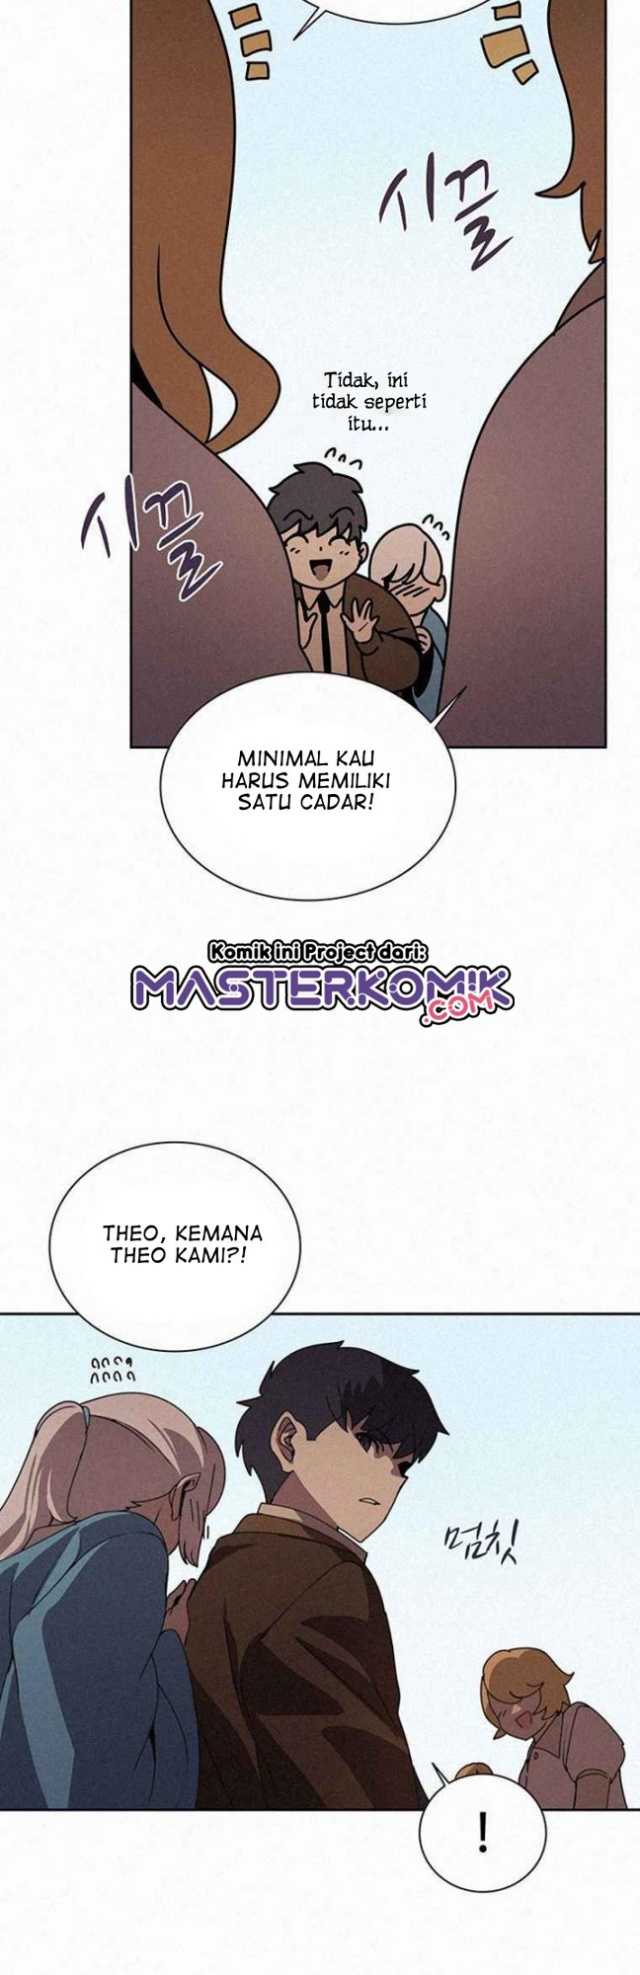 The Book Eating Magician Chapter 35